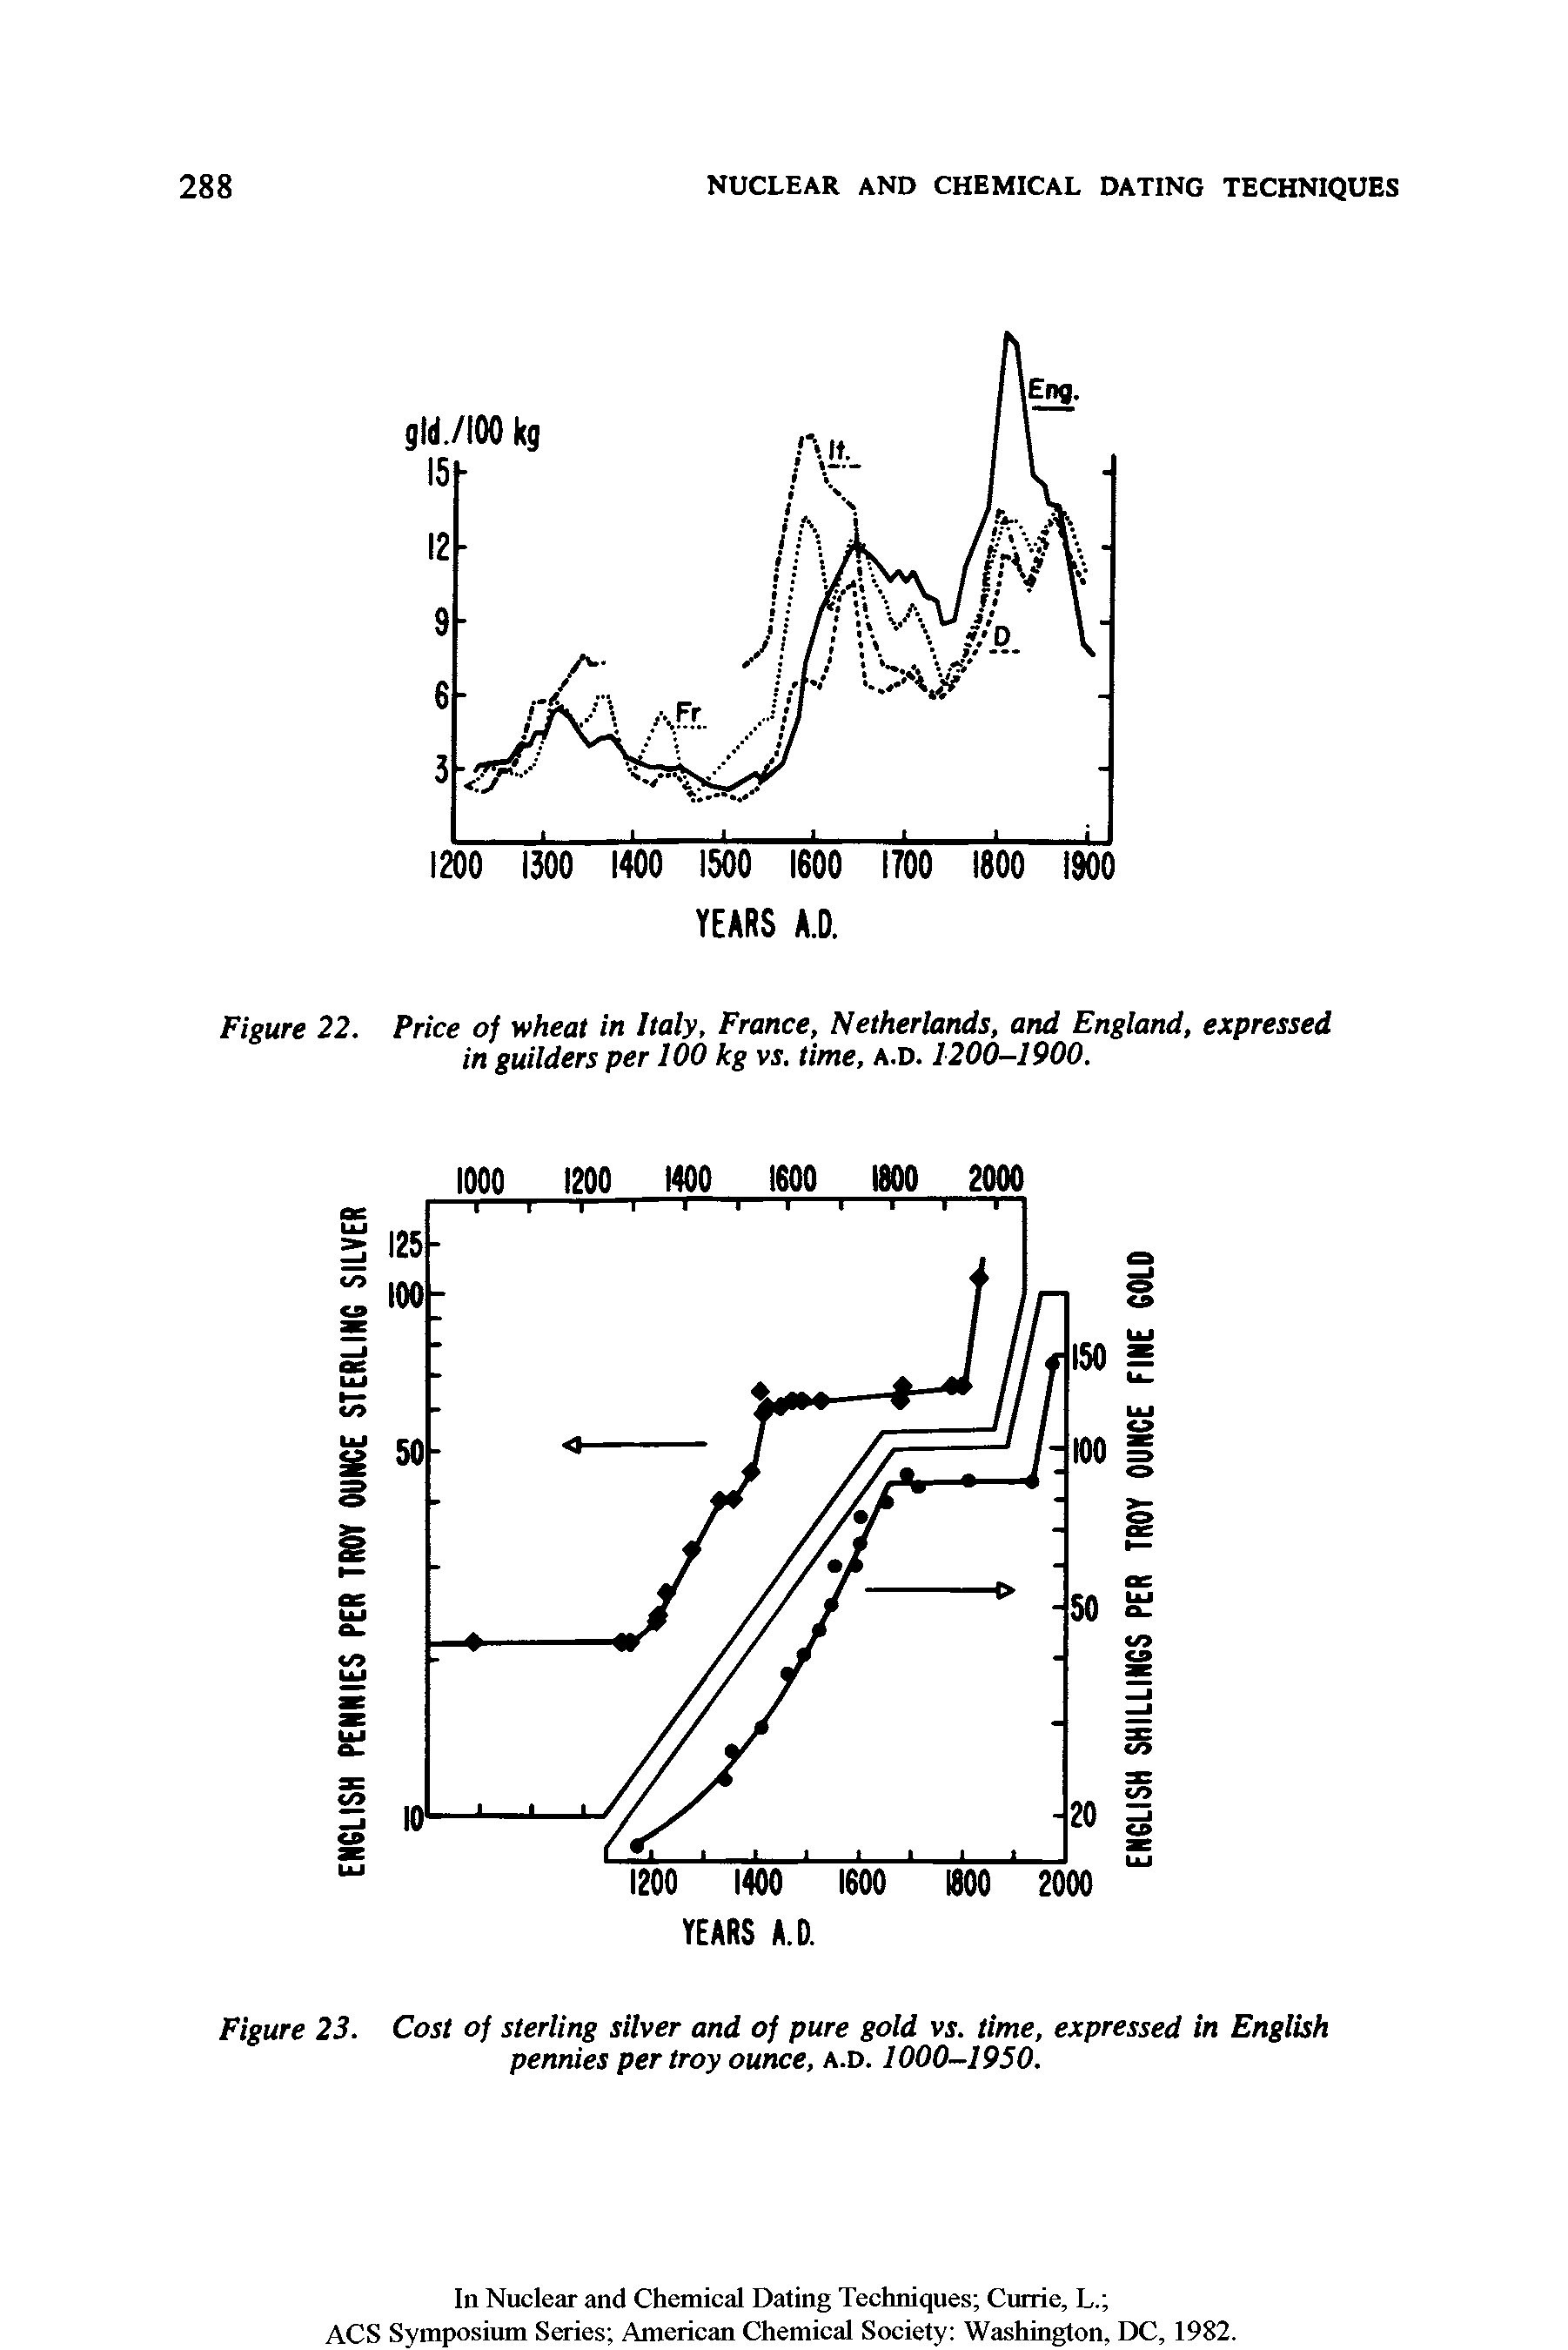 Figure 22. Price of wheat in Italy, France, Netherlands, and England, expressed in guilders per 100 kg vs. time, a.d. 1200-1900.